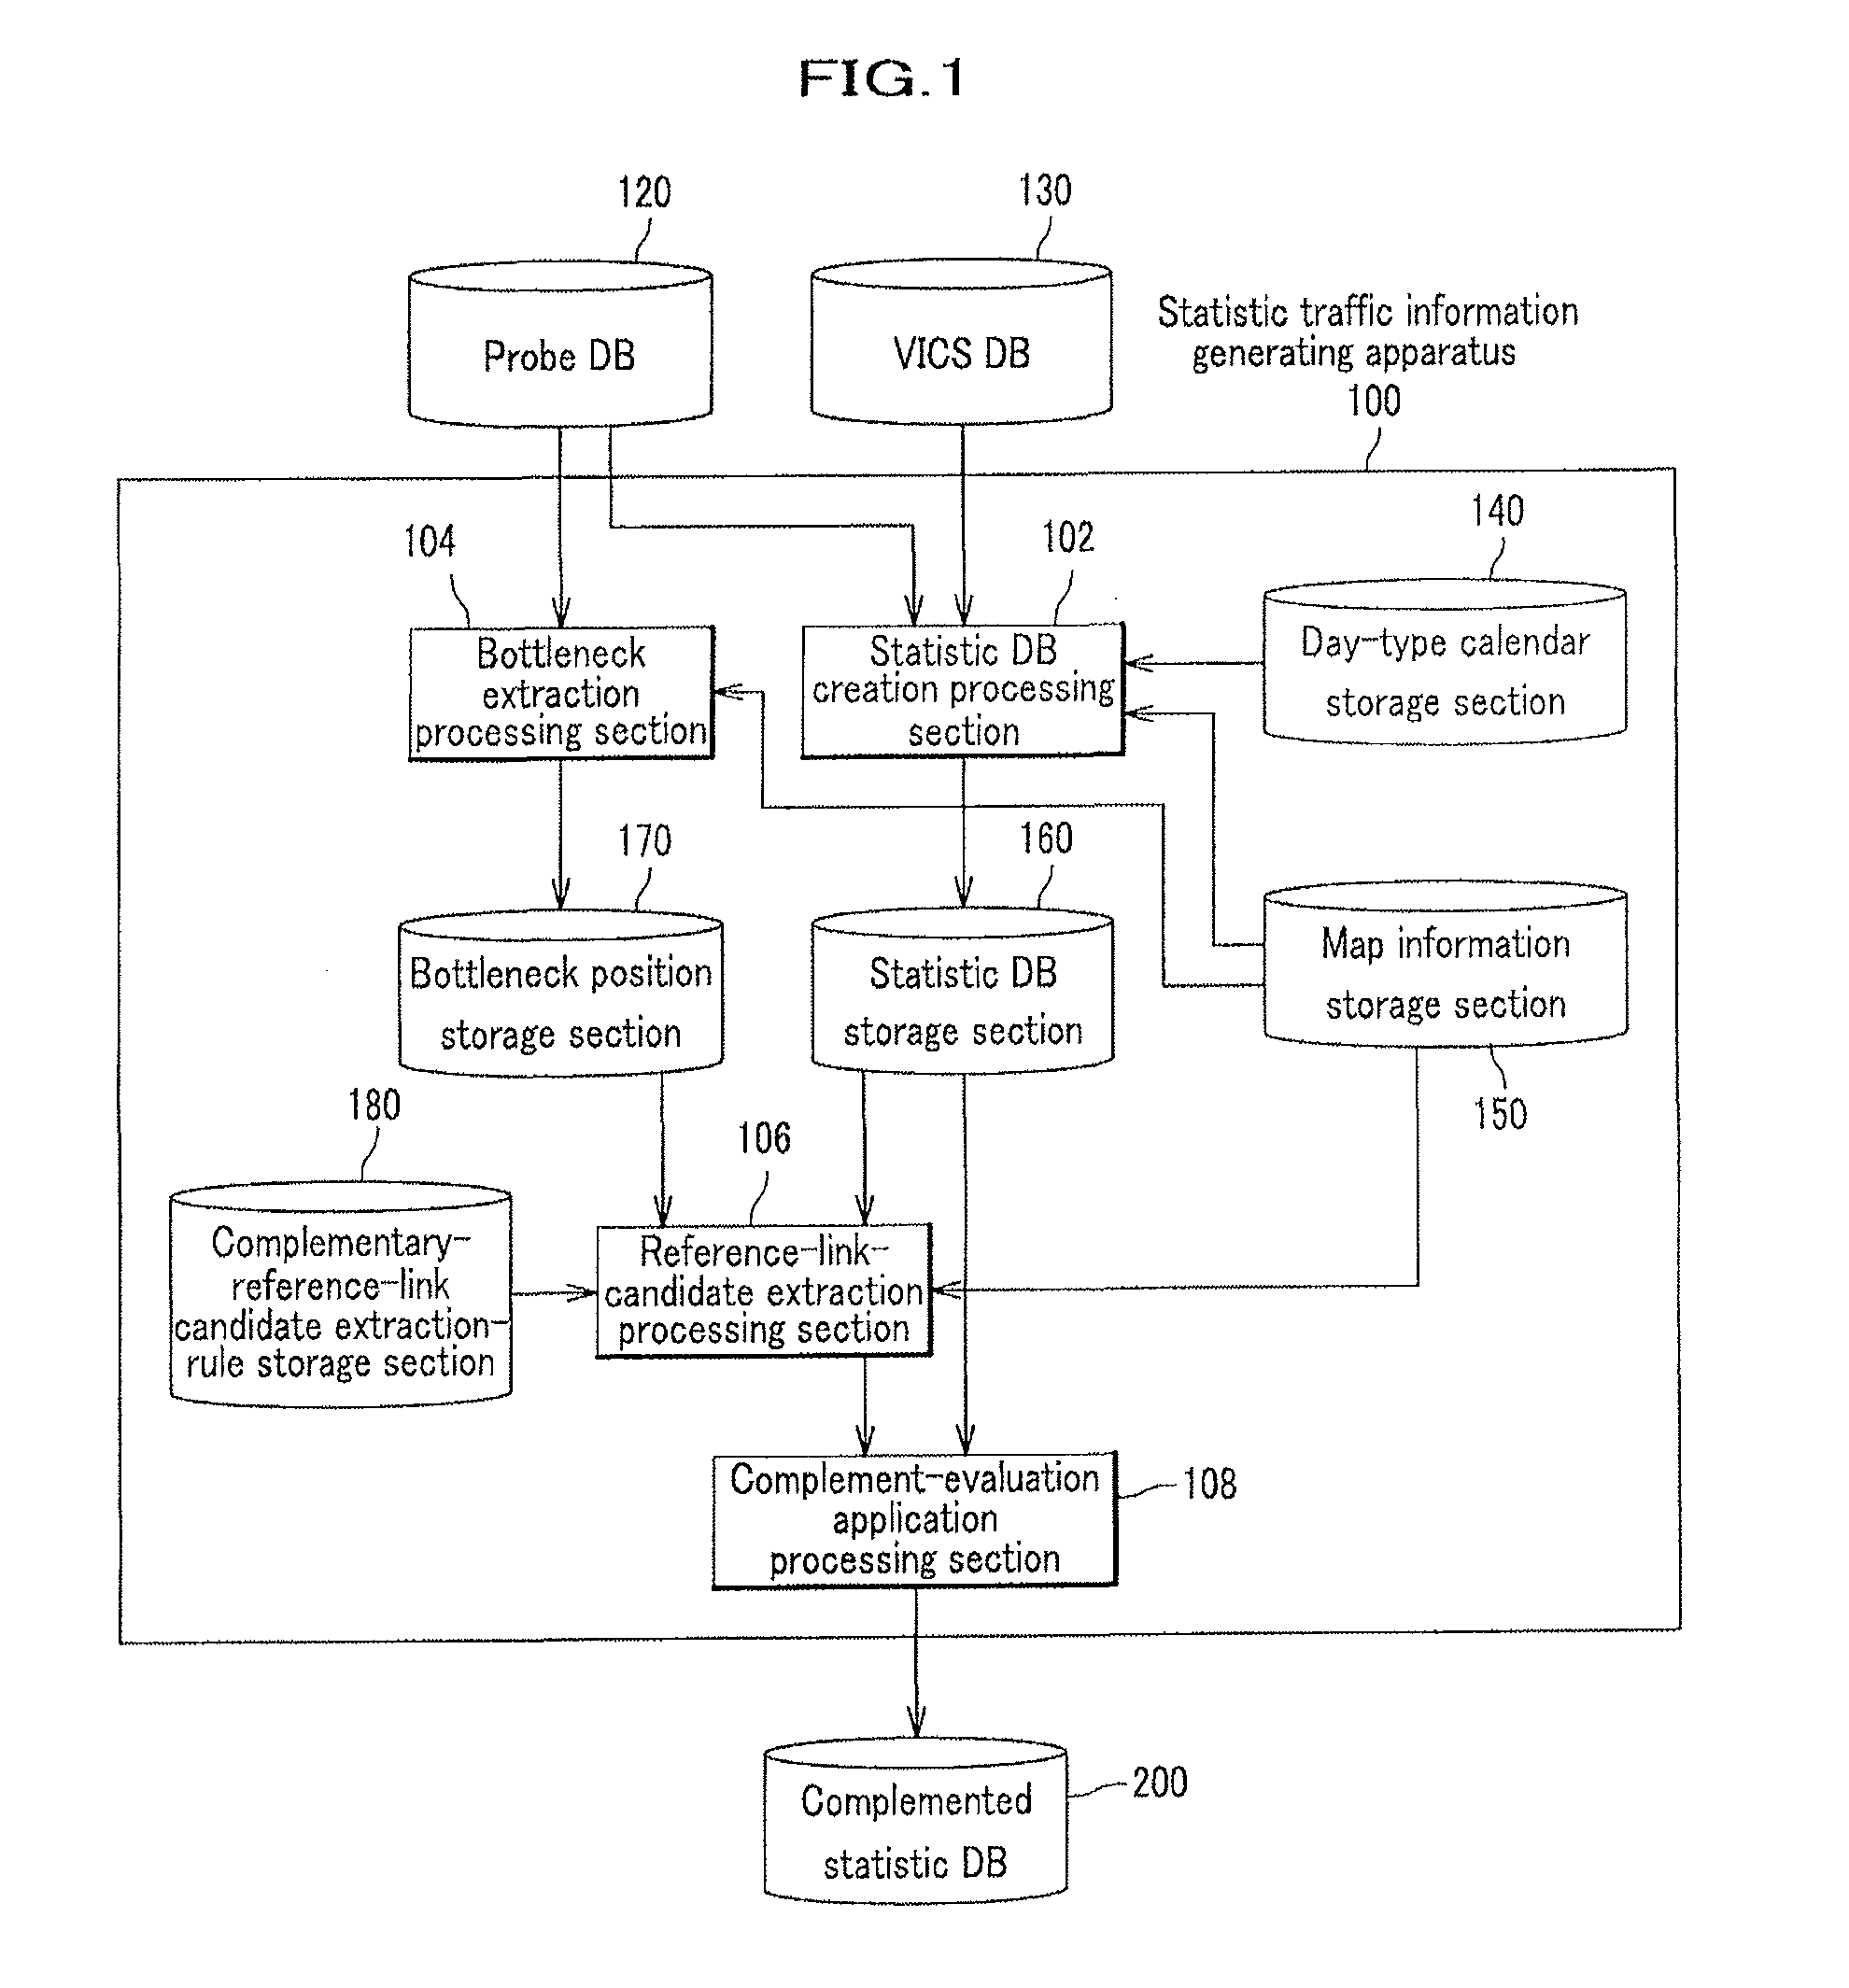 Apparatus and Method for Generating Statistic Traffic Information